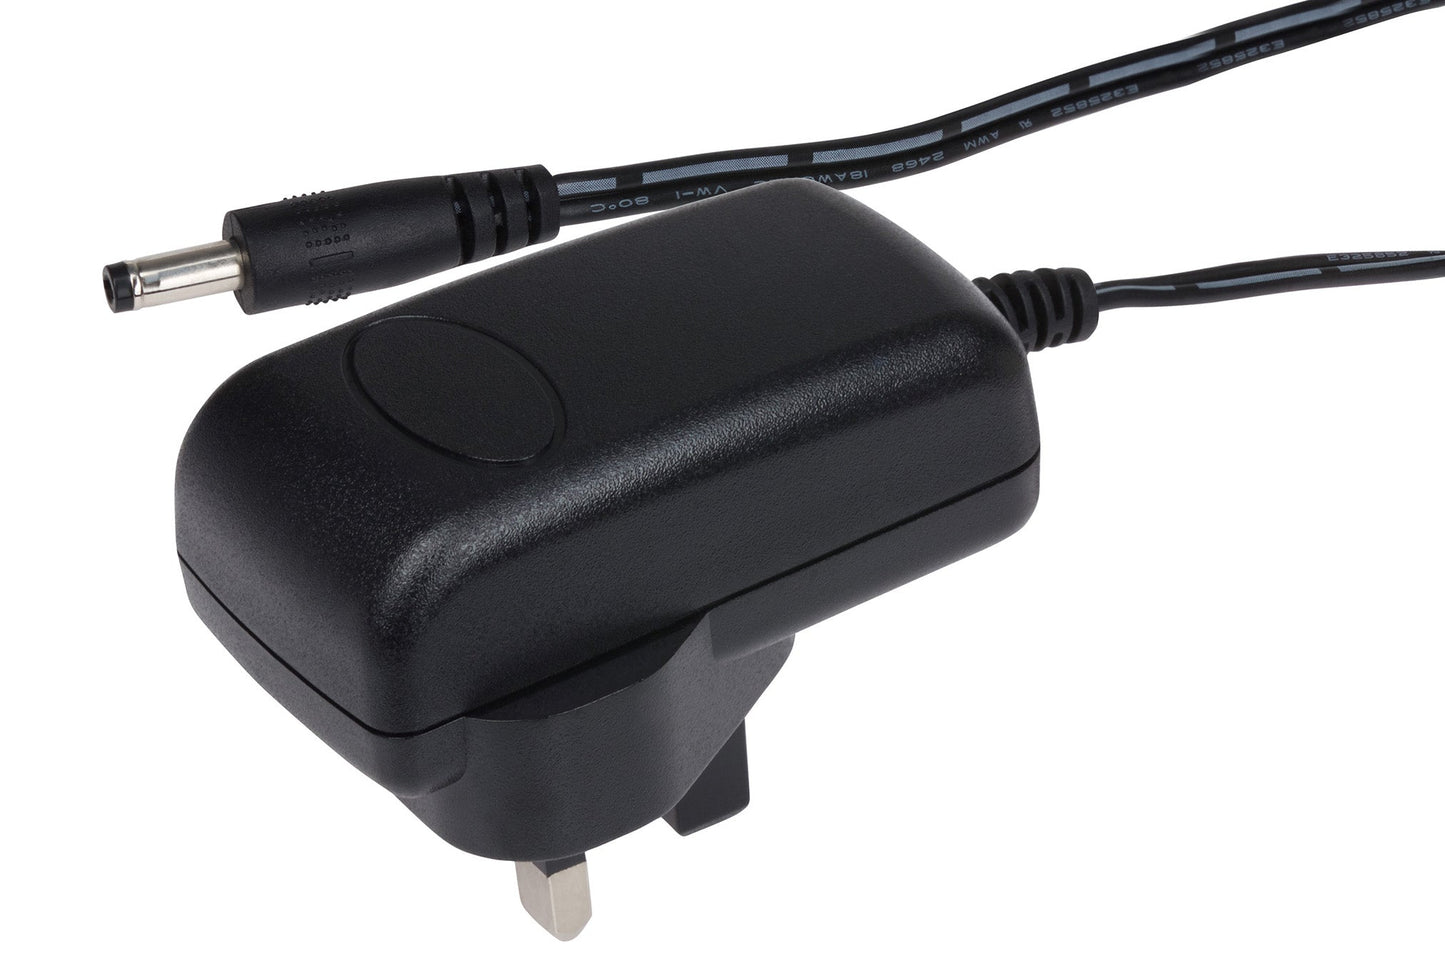 MPS Maplin UK Switching Power Supply 12V DC 2 Amp 24W 2.5 x 5.5 x 12mm Plug - 1.5m Cable - maplin.co.uk